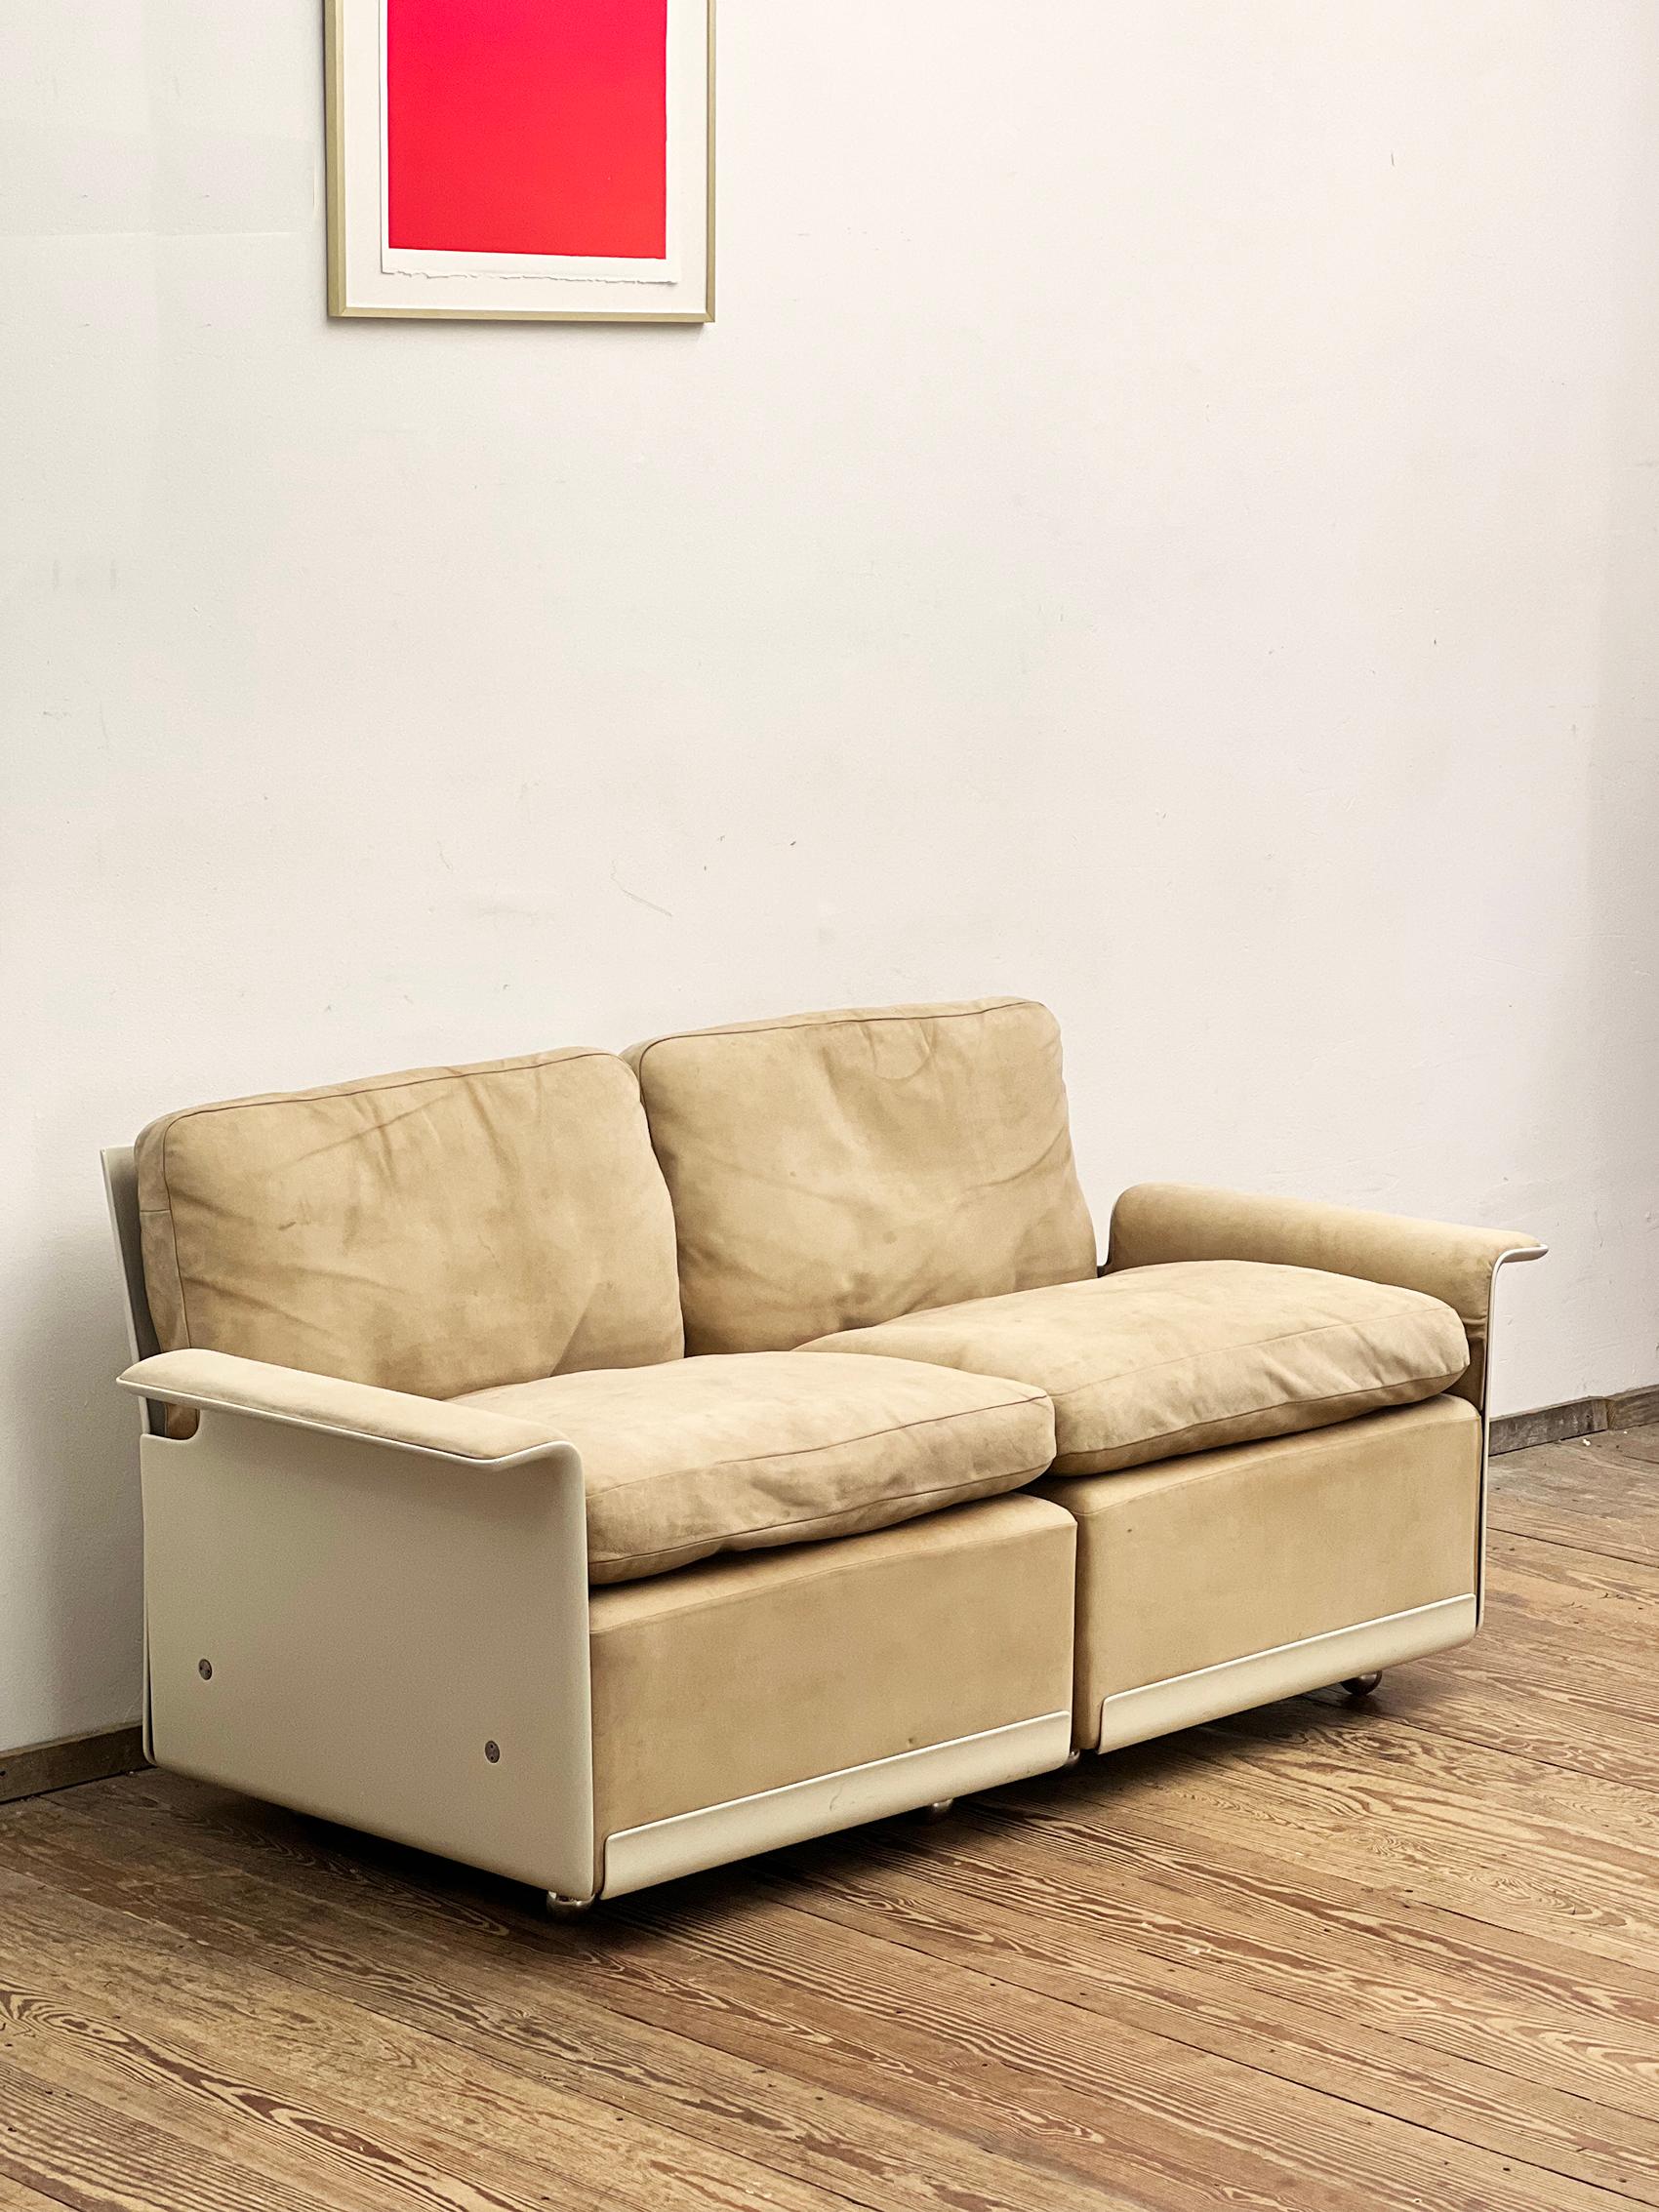 Mid-Century Lounge Sofa or Couch by Dieter Rams for Vitsoe, German Design, 1960s 10